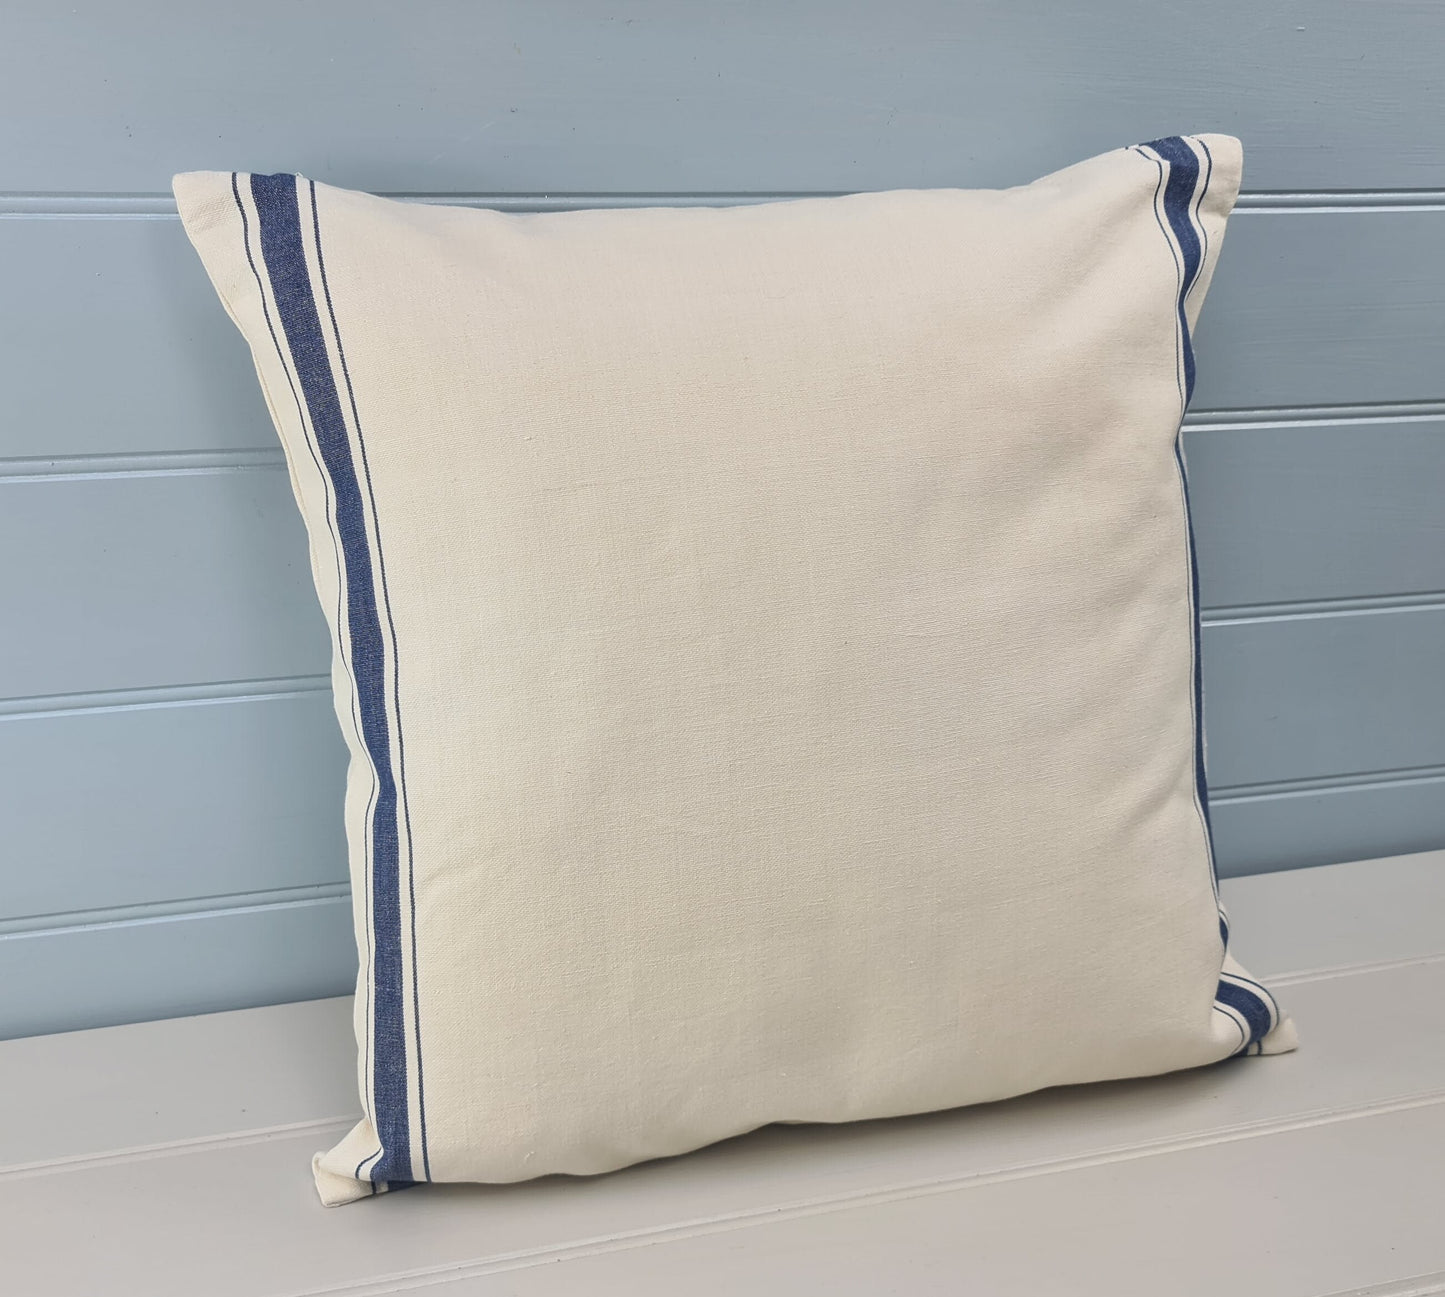 French striped cushion pillow cover 18in 45cm sq Traditional double navy nautical stripes on premium cream cotton Double sided Heavy duty